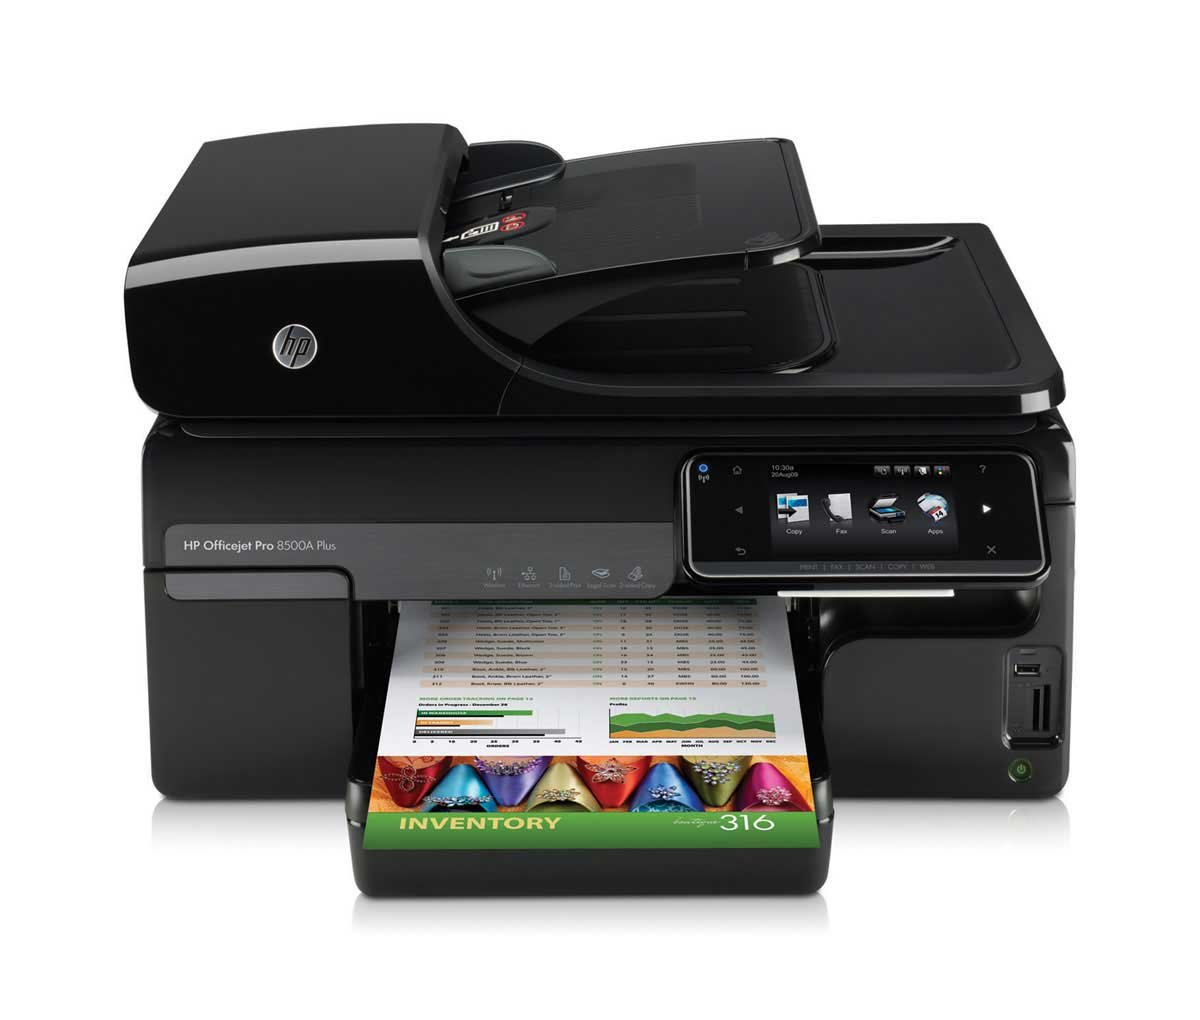 Officejet Pro 8500A e-All-in-One Printer series - A910